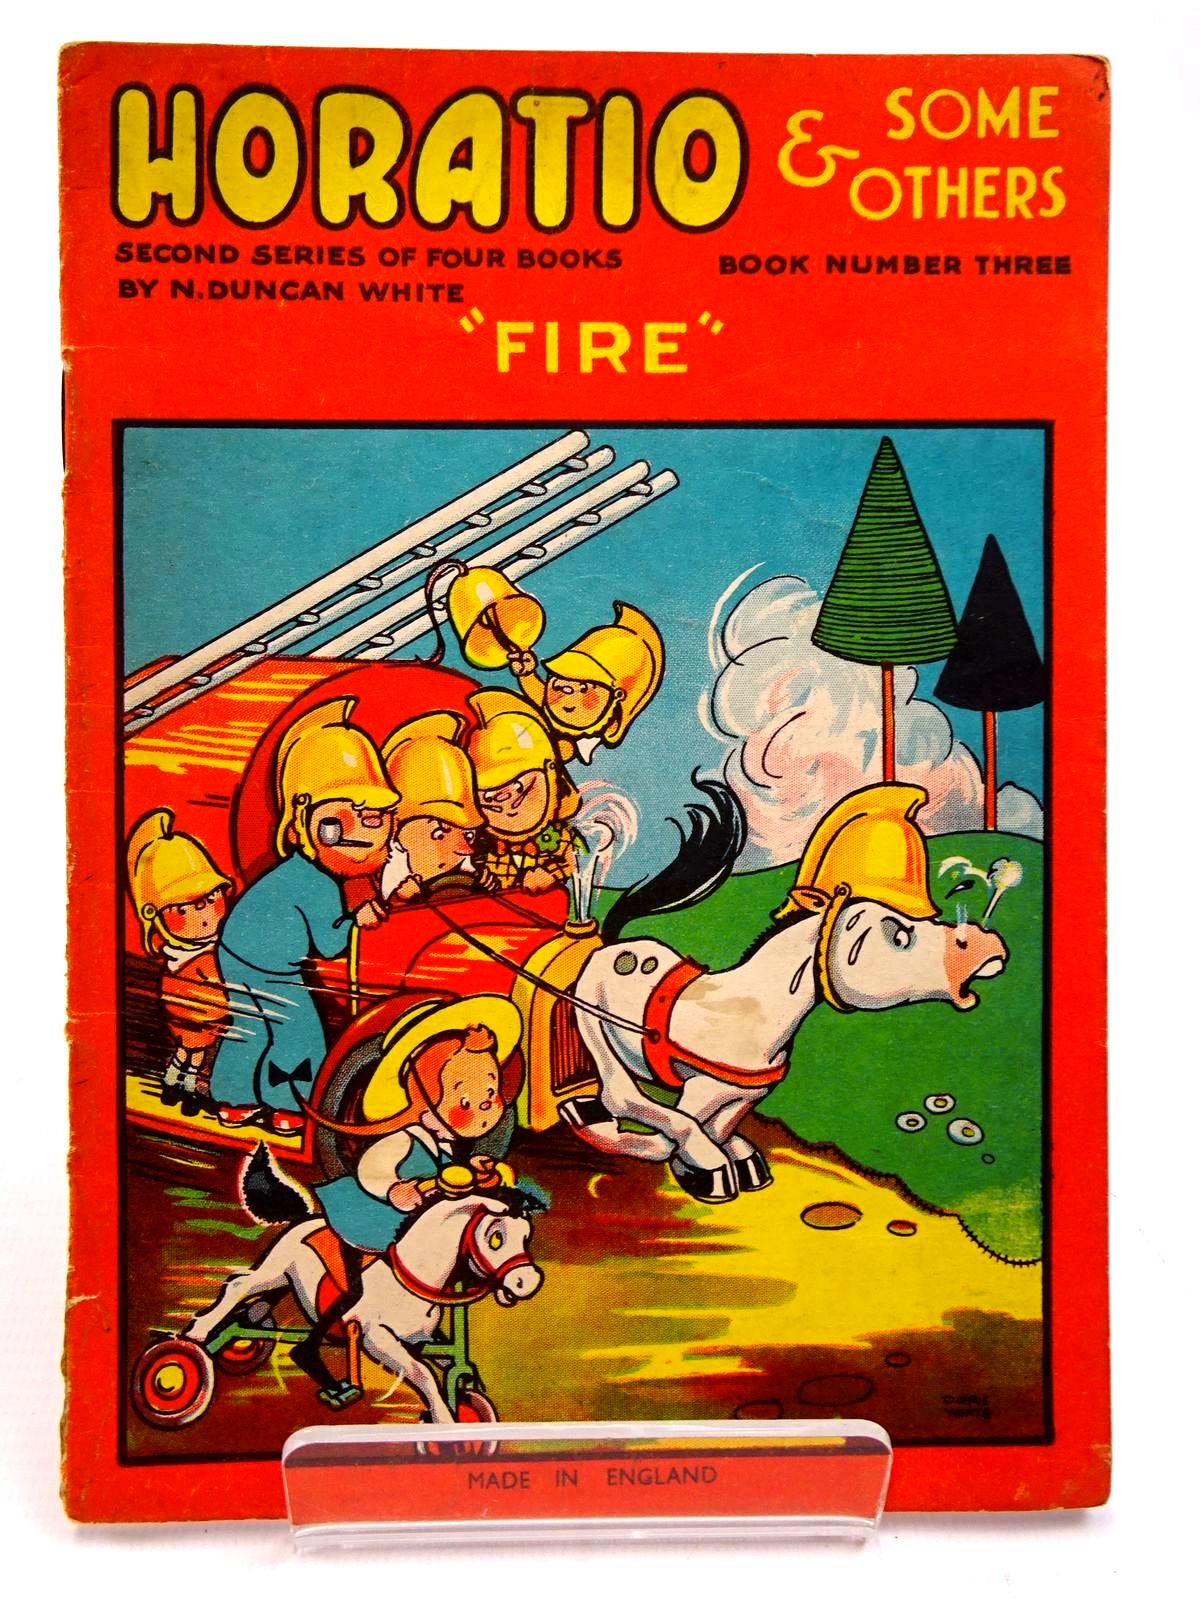 Photo of HORATIO &amp; SOME OTHERS BOOK NUMBER THREE (SECOND SERIES) &quot;FIRE&quot; written by White, N. Duncan illustrated by White, Doris published by F. Levy &amp; Co. Ltd. (STOCK CODE: 2131009)  for sale by Stella & Rose's Books